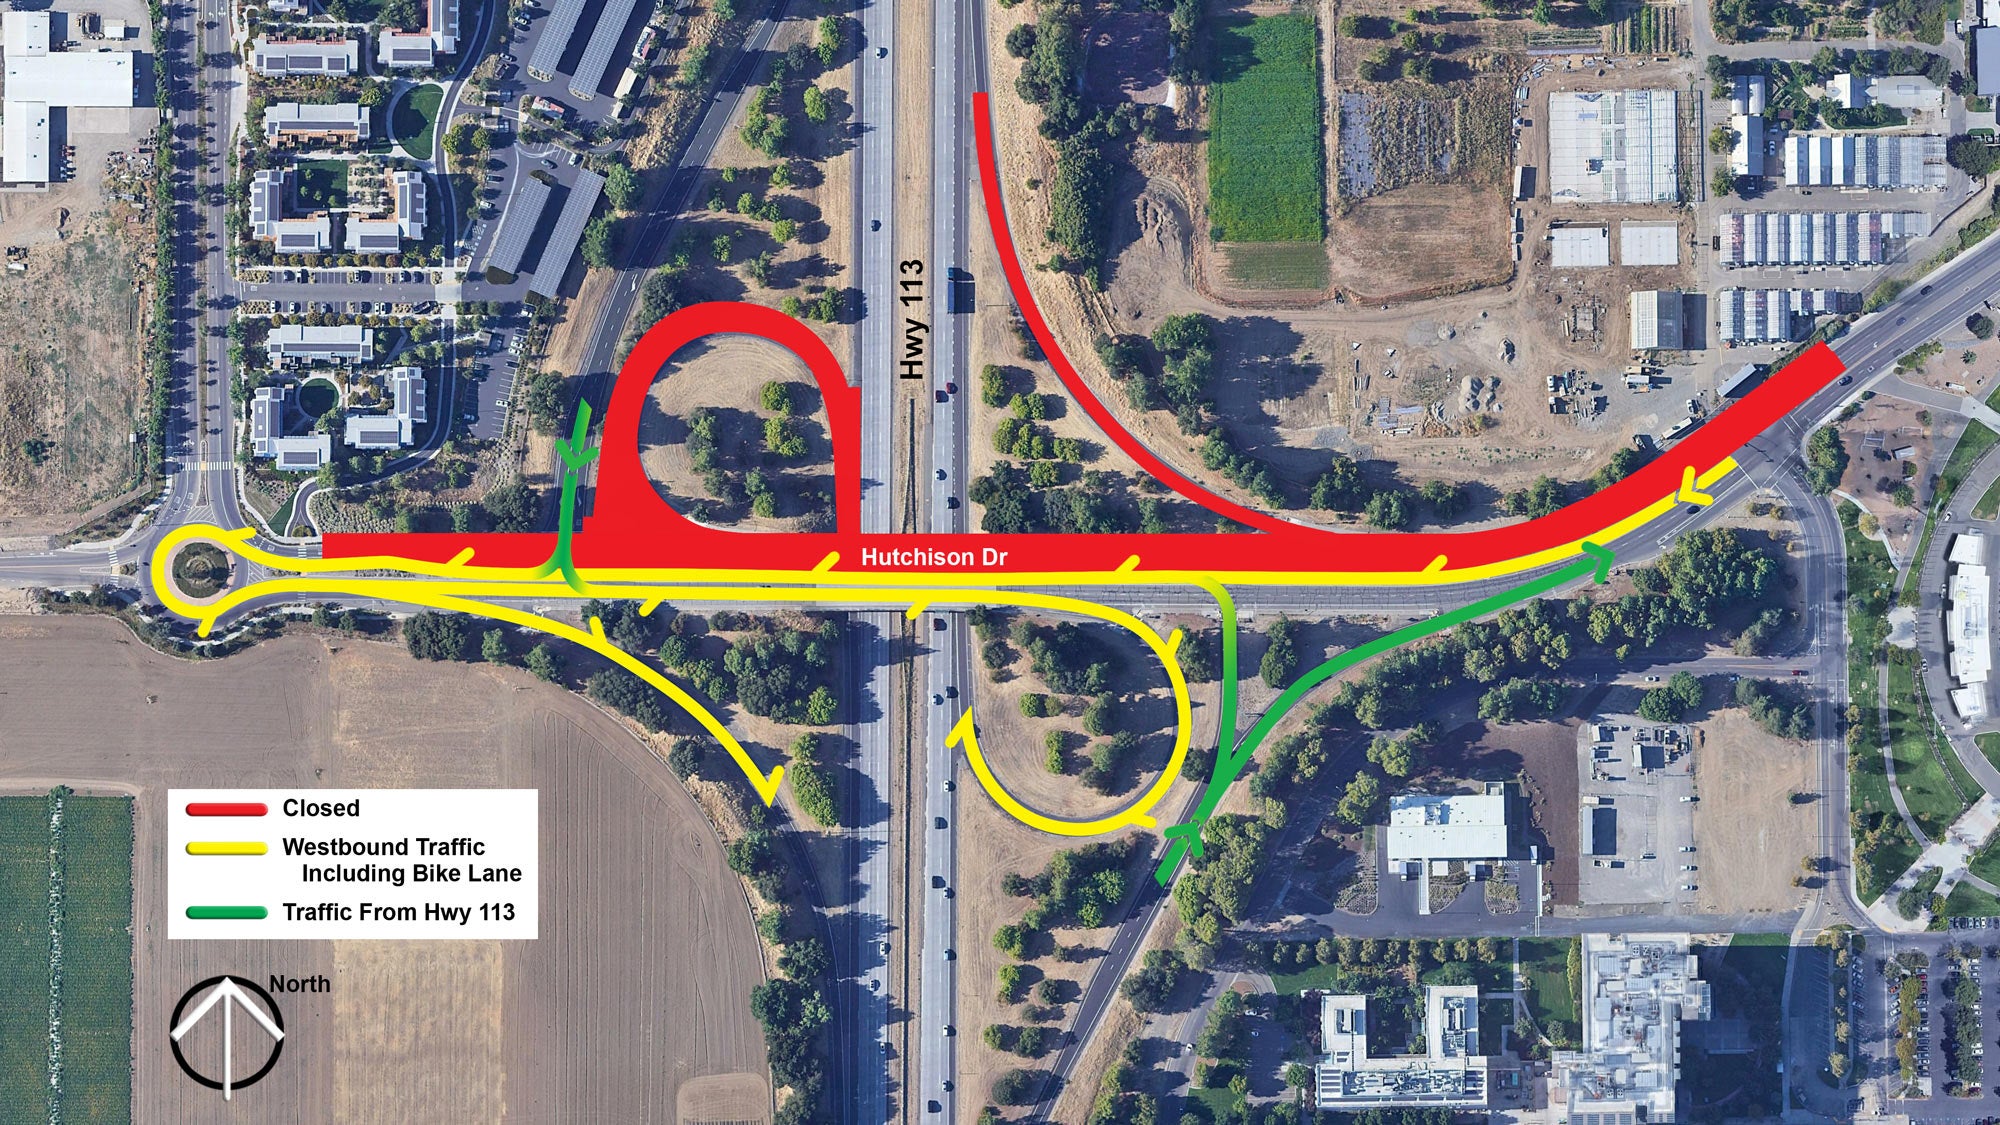 Aerial view of highway interchange with detour route added